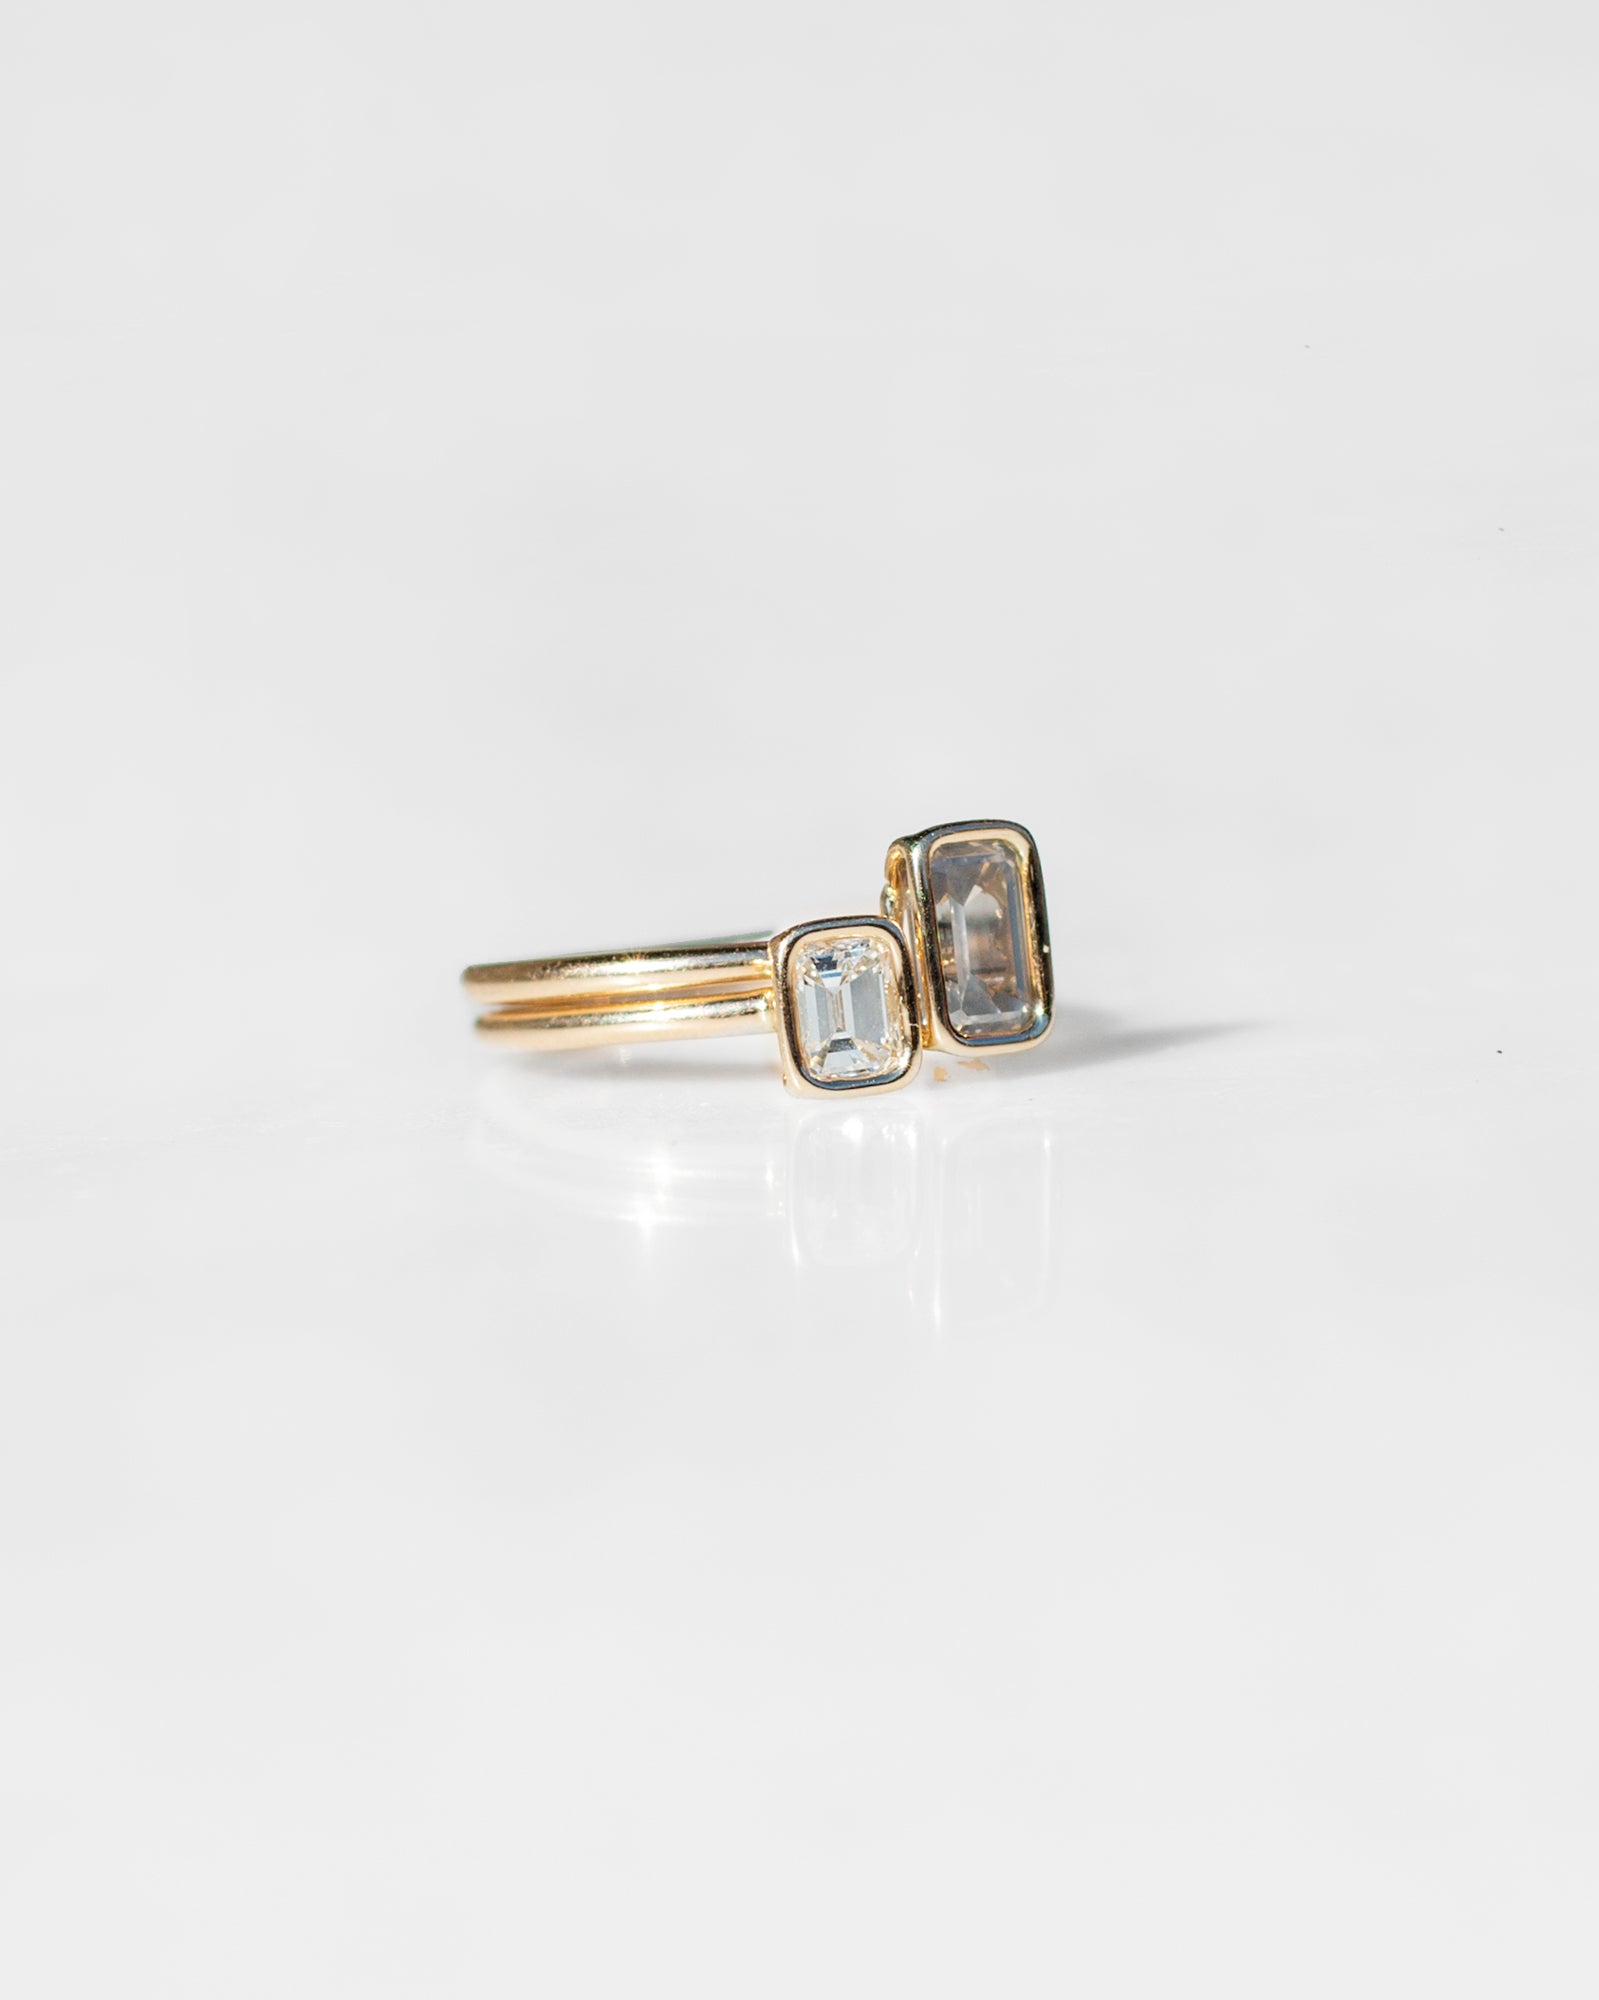 Toi et Moi Diamond Floating Rings - Blue Grey and White Emerald Cut